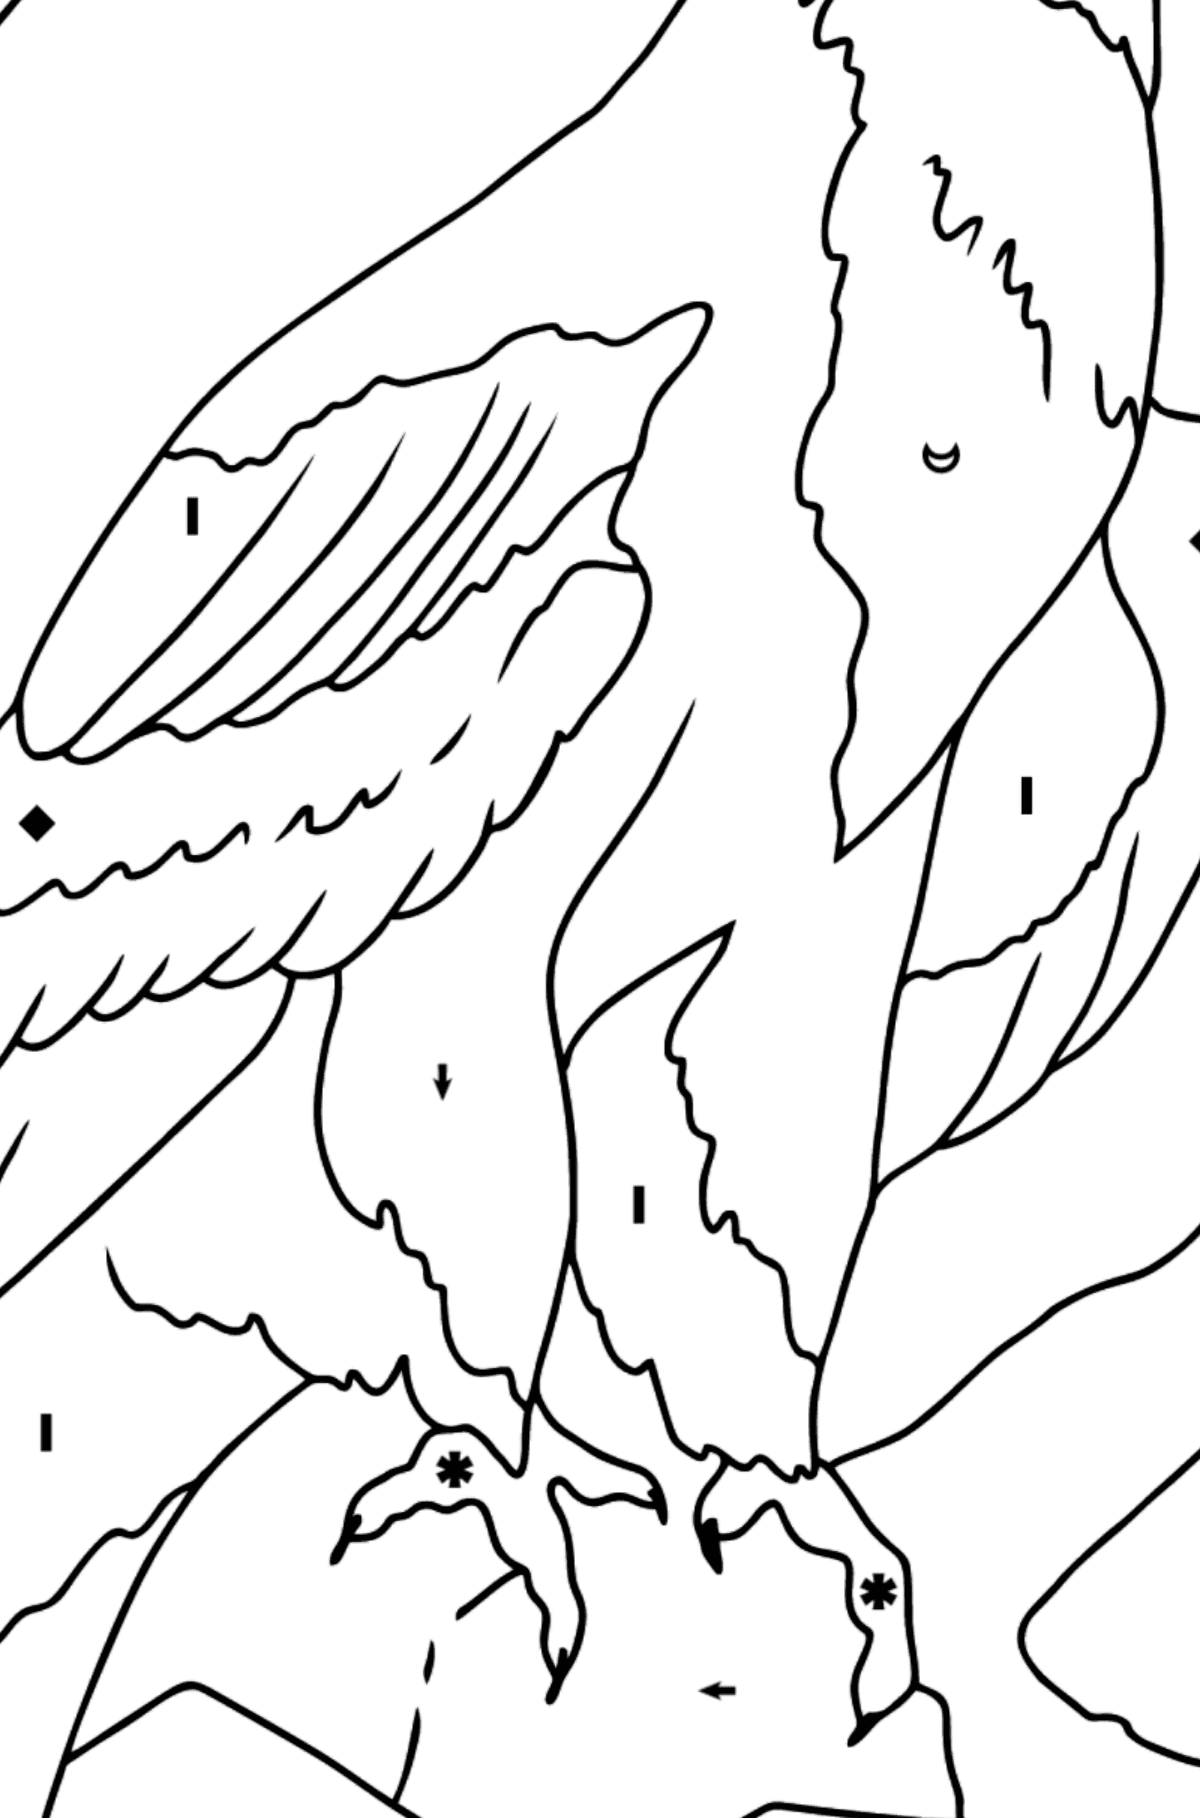 Coloring Page - An Alpine Eagle - Coloring by Symbols for Kids